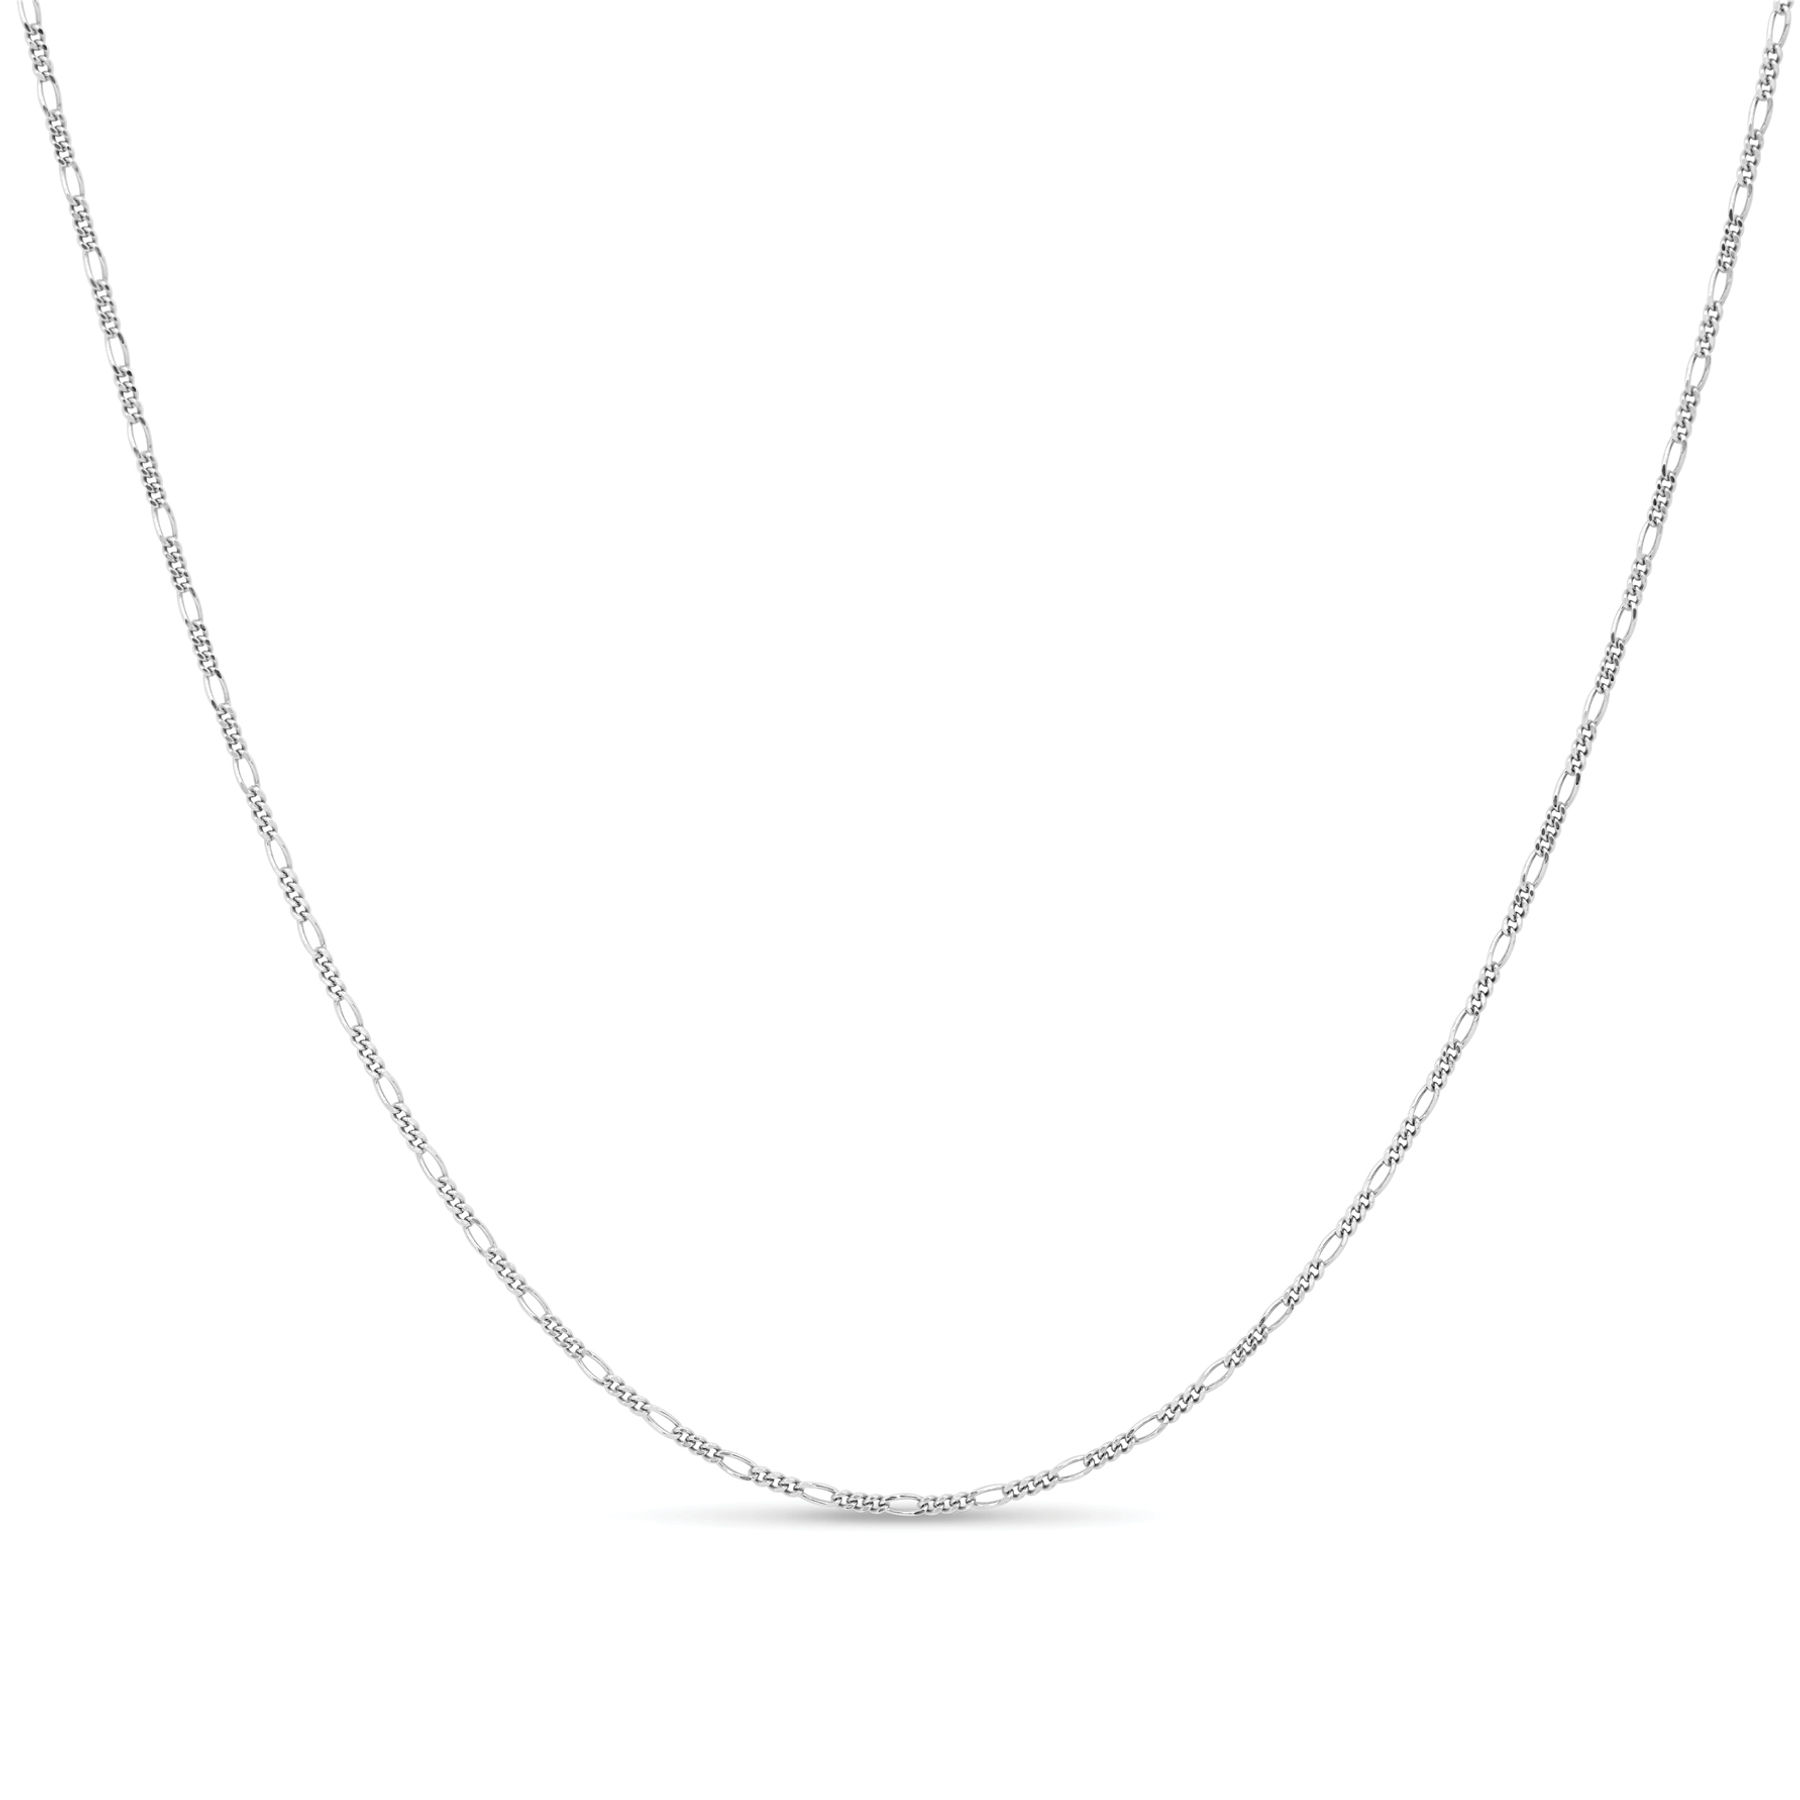 1mm Box Chain Hypoallergenic and Tarnish Resistant Comfortable Fit By Kezef Creations Sterling Silver Necklace Classic Design